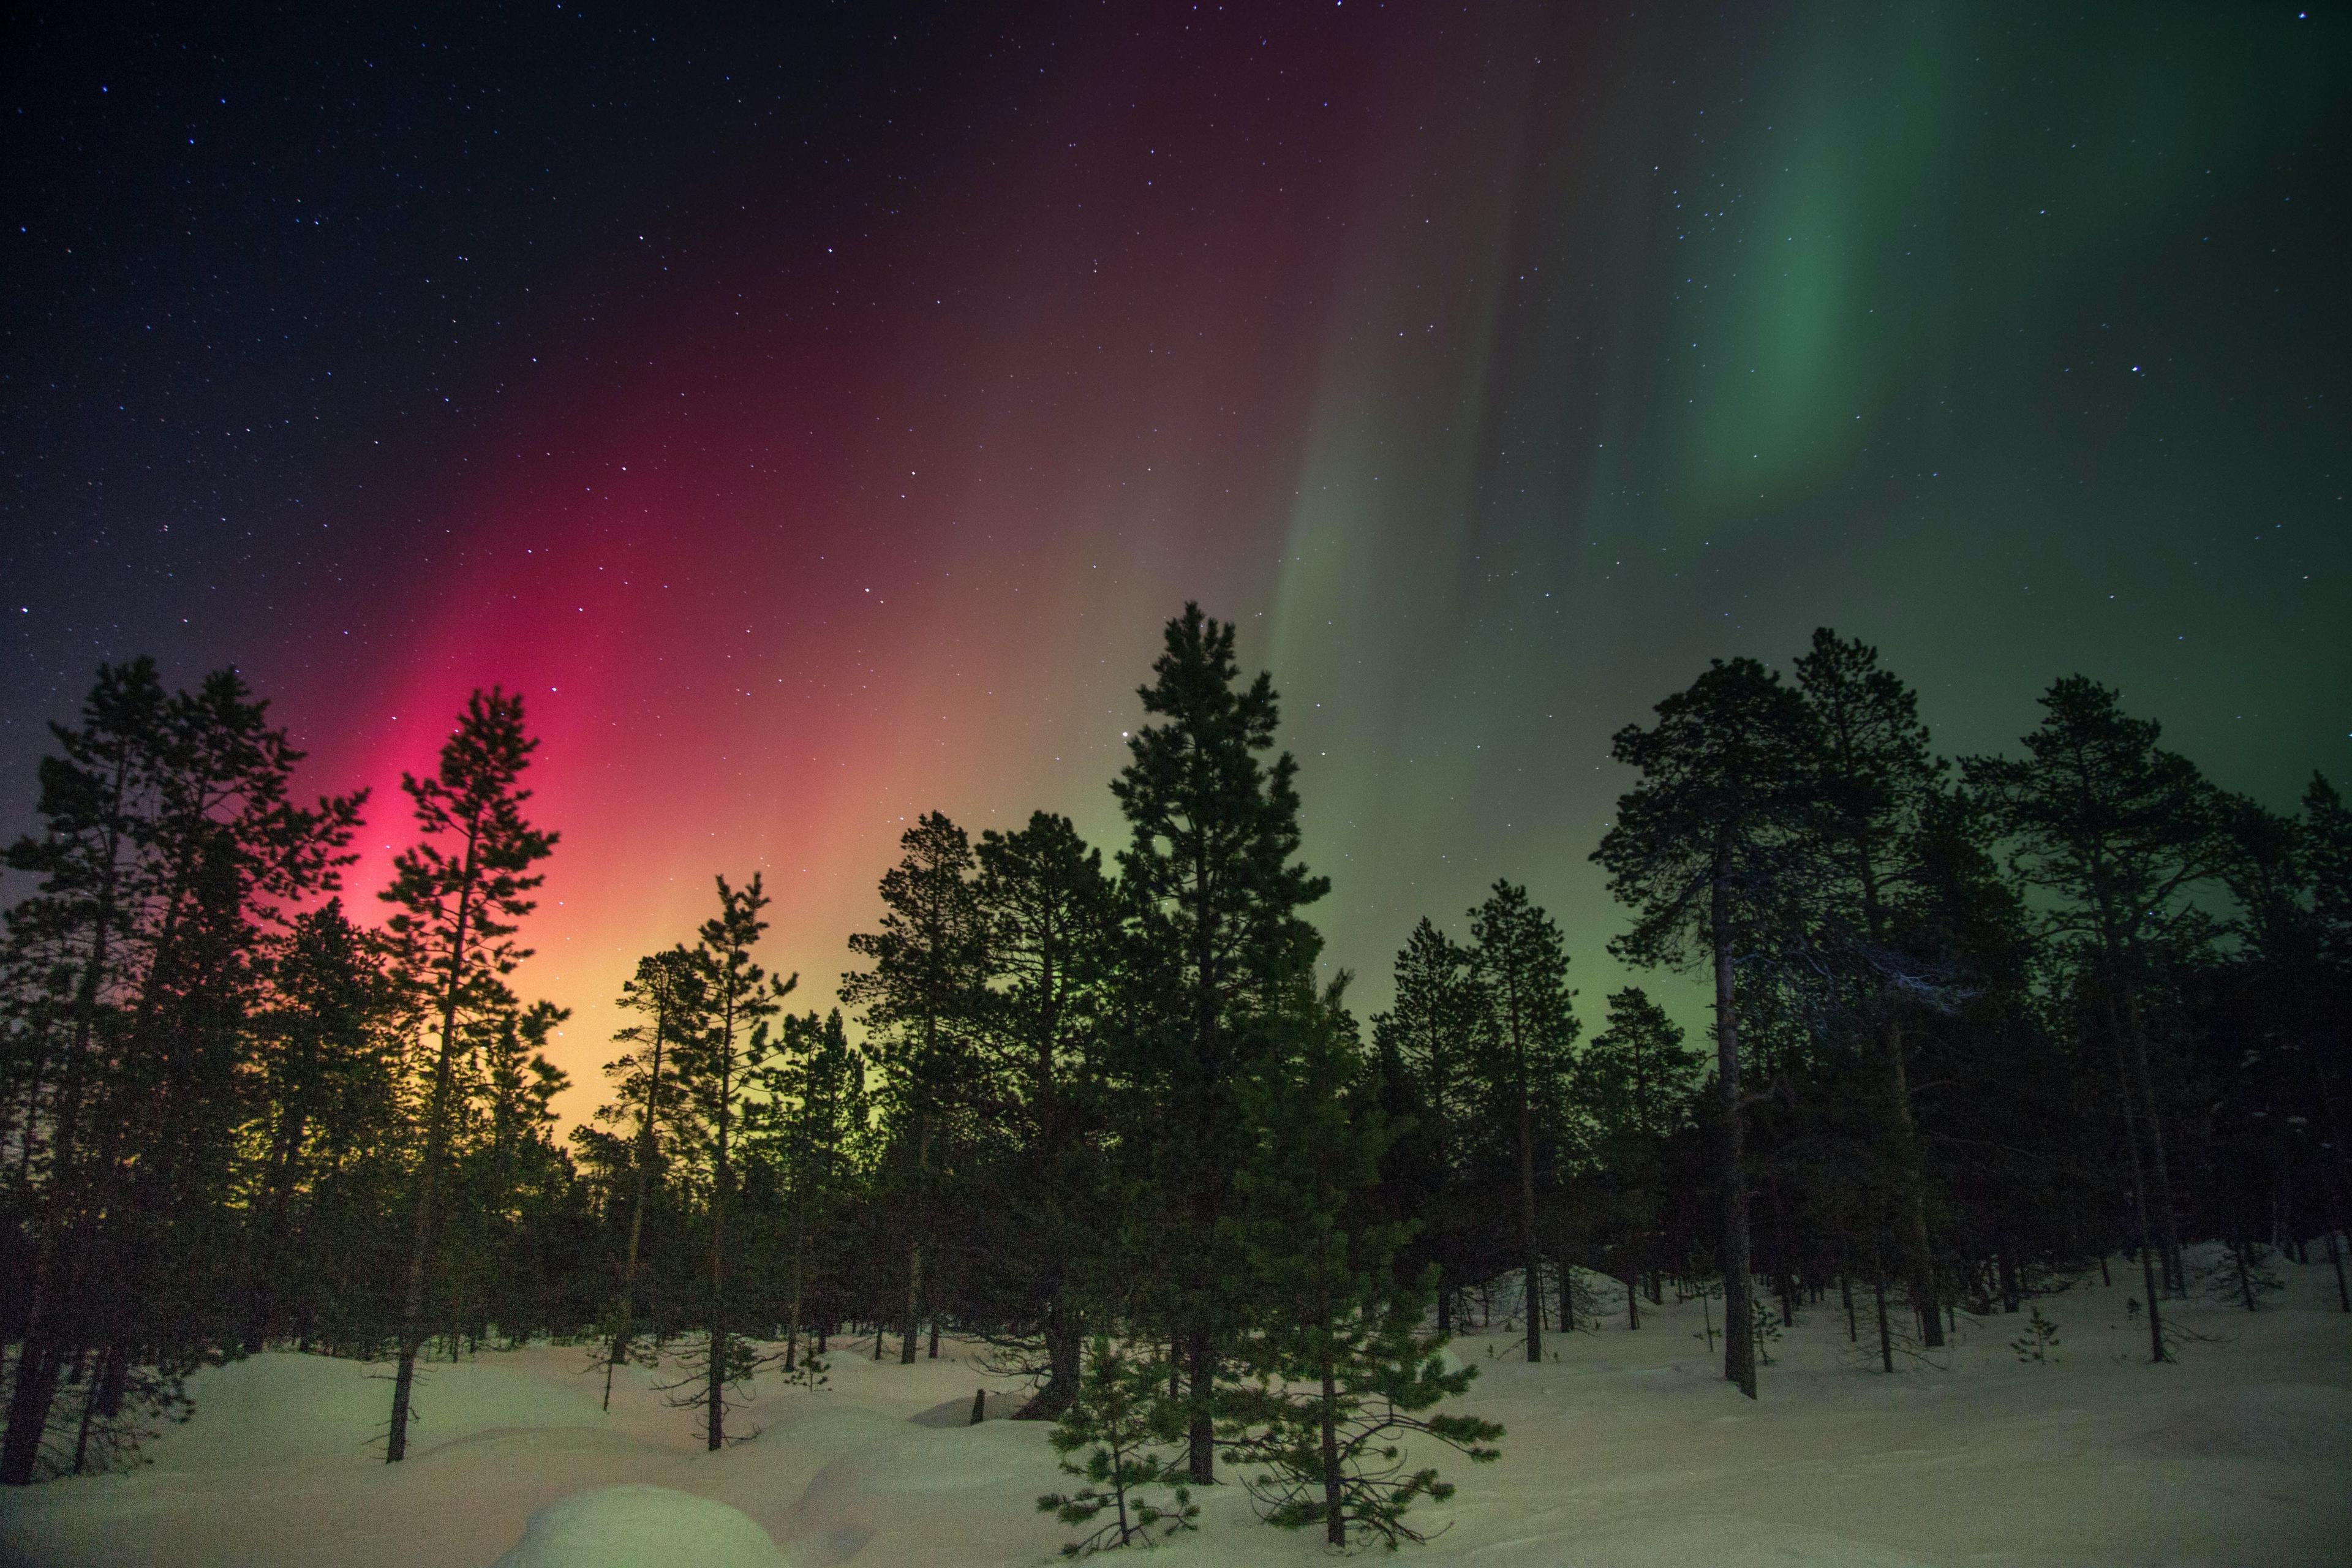 A colorful aurora display in hues of green and pink lights up the night sky over a snowy pine forest.